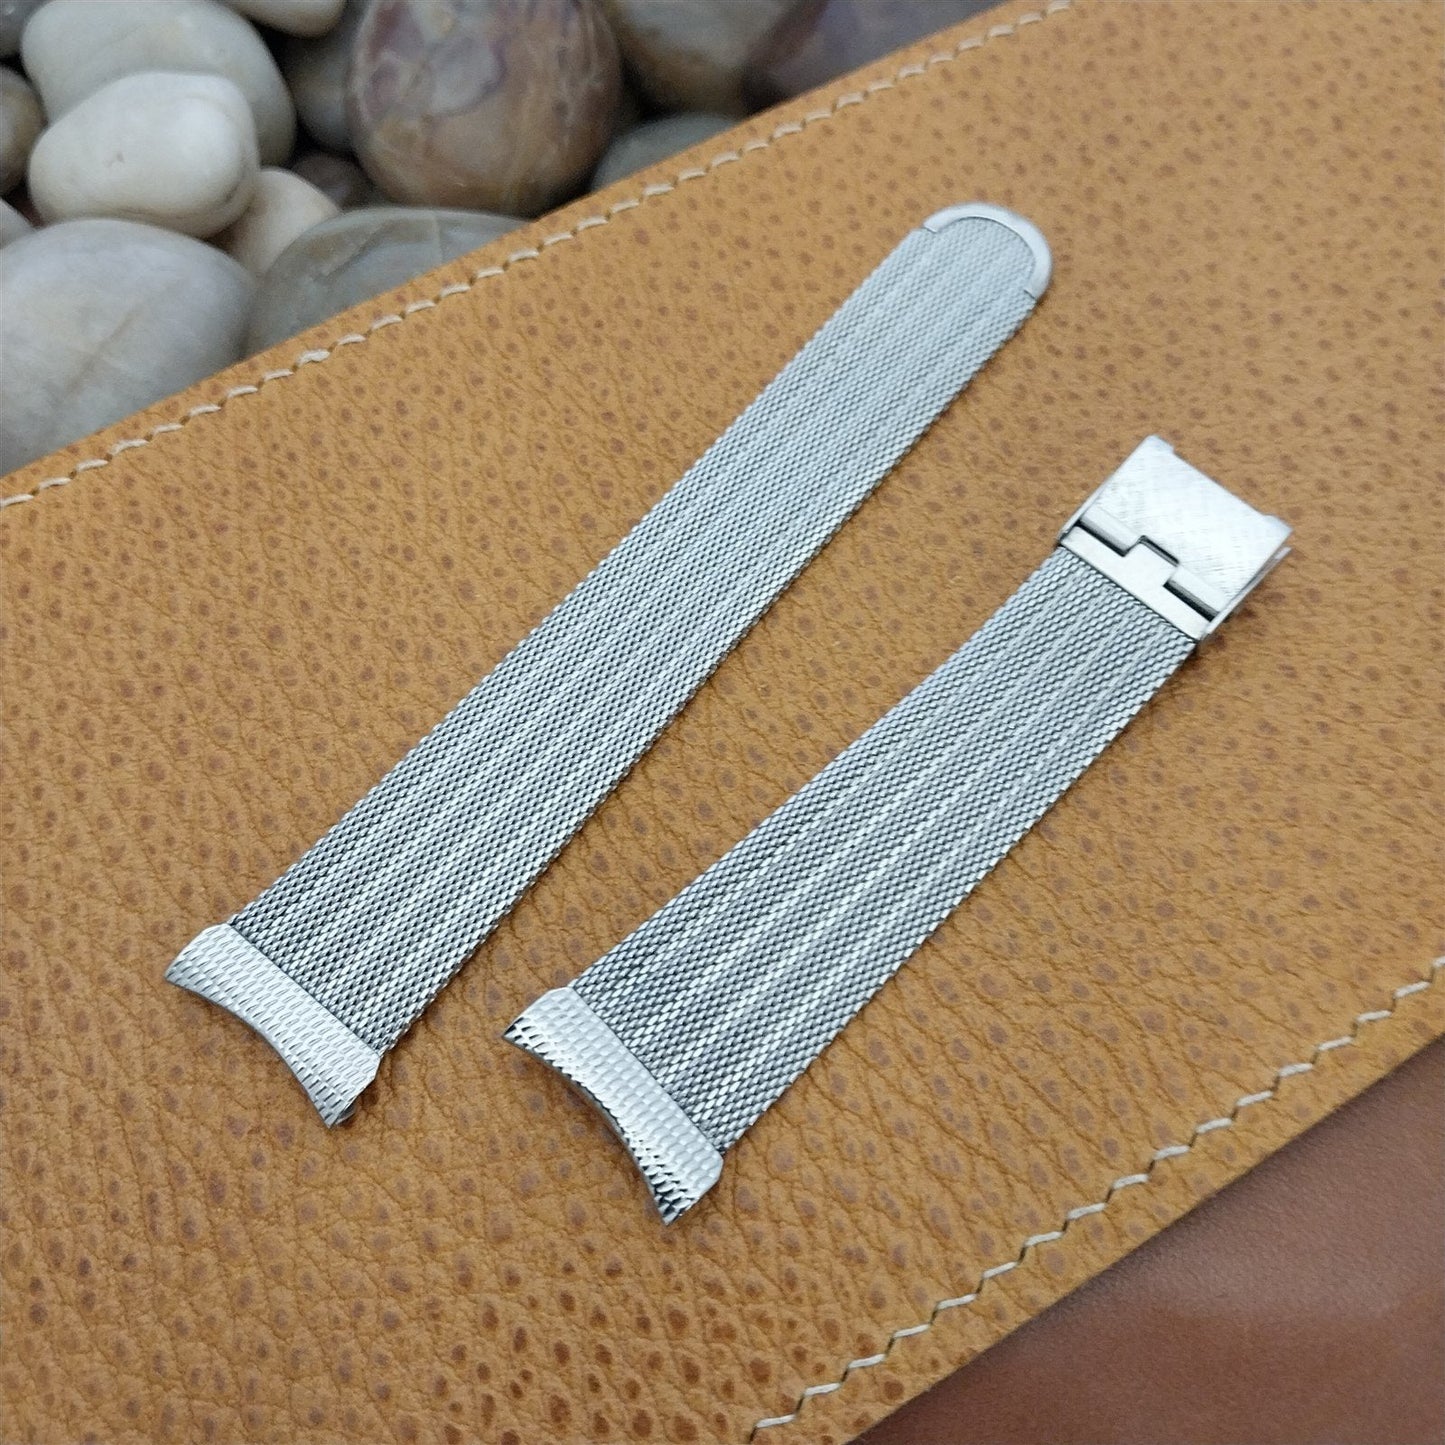 17mm 18mm 19mm Stainless Steel Mesh Hadley USA Unused 1960s Vintage Watch Band